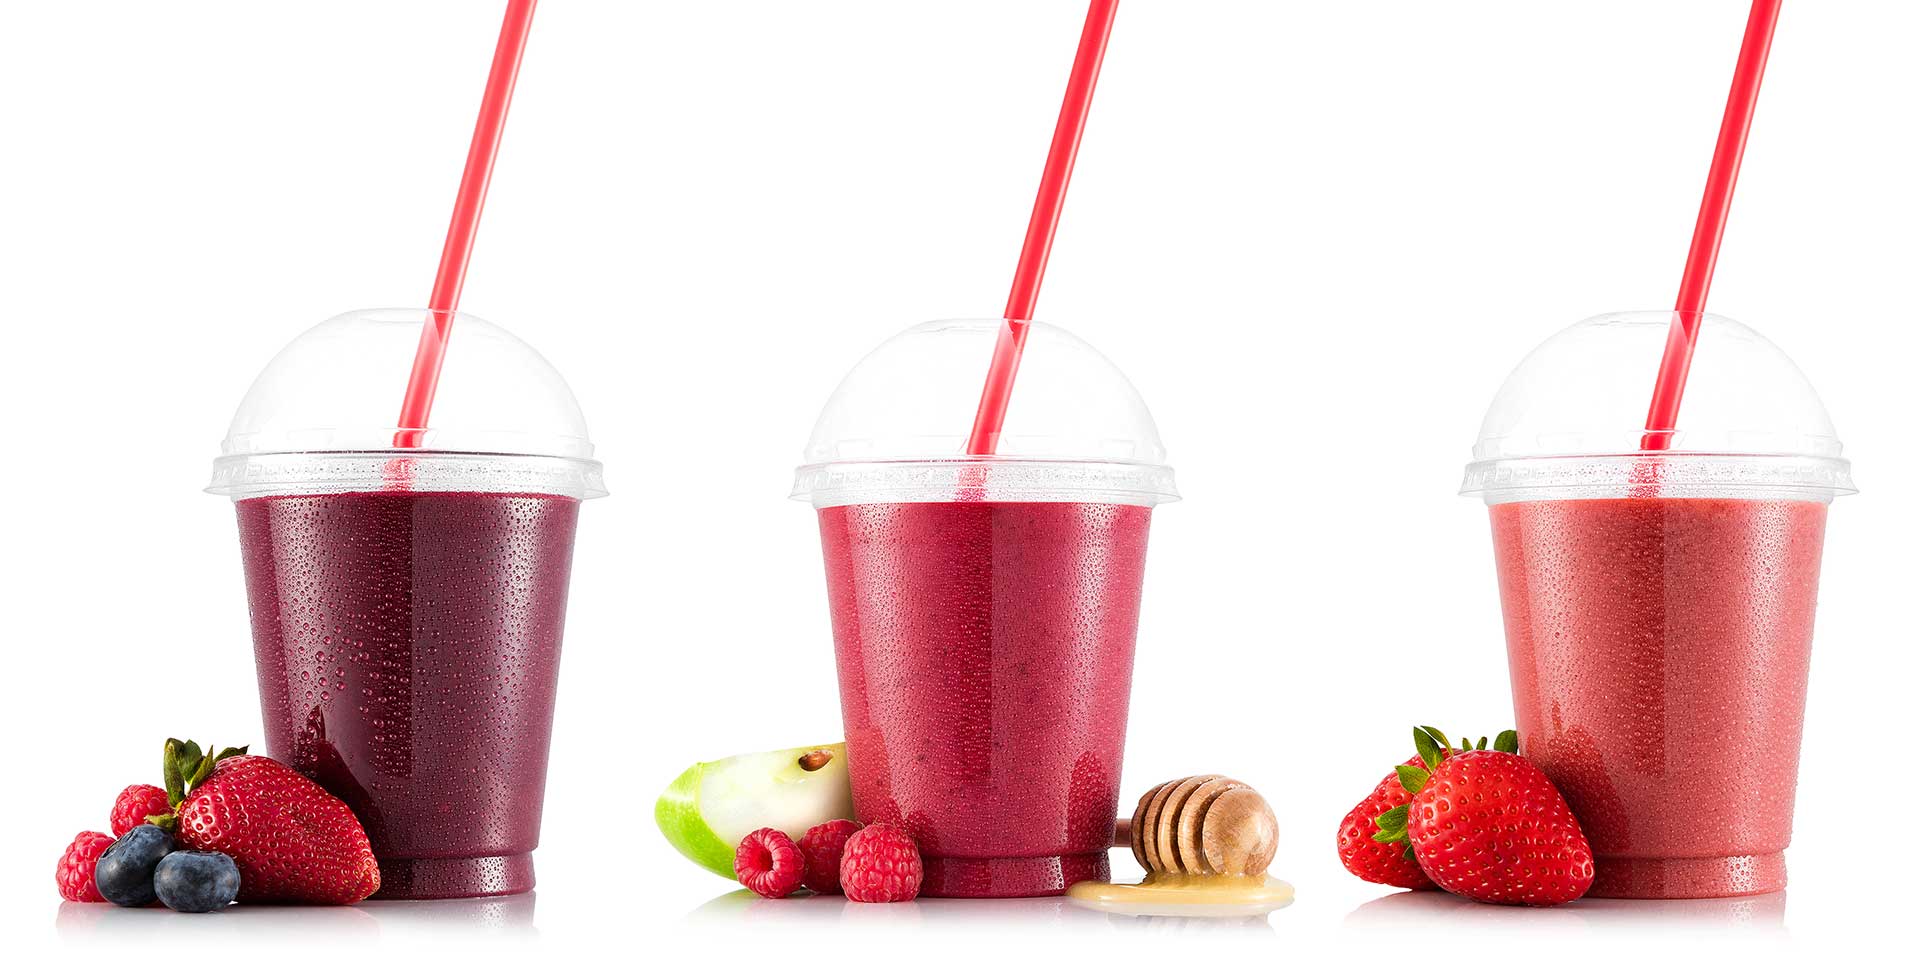 Does Smoothie King use real fruits? - Foodly